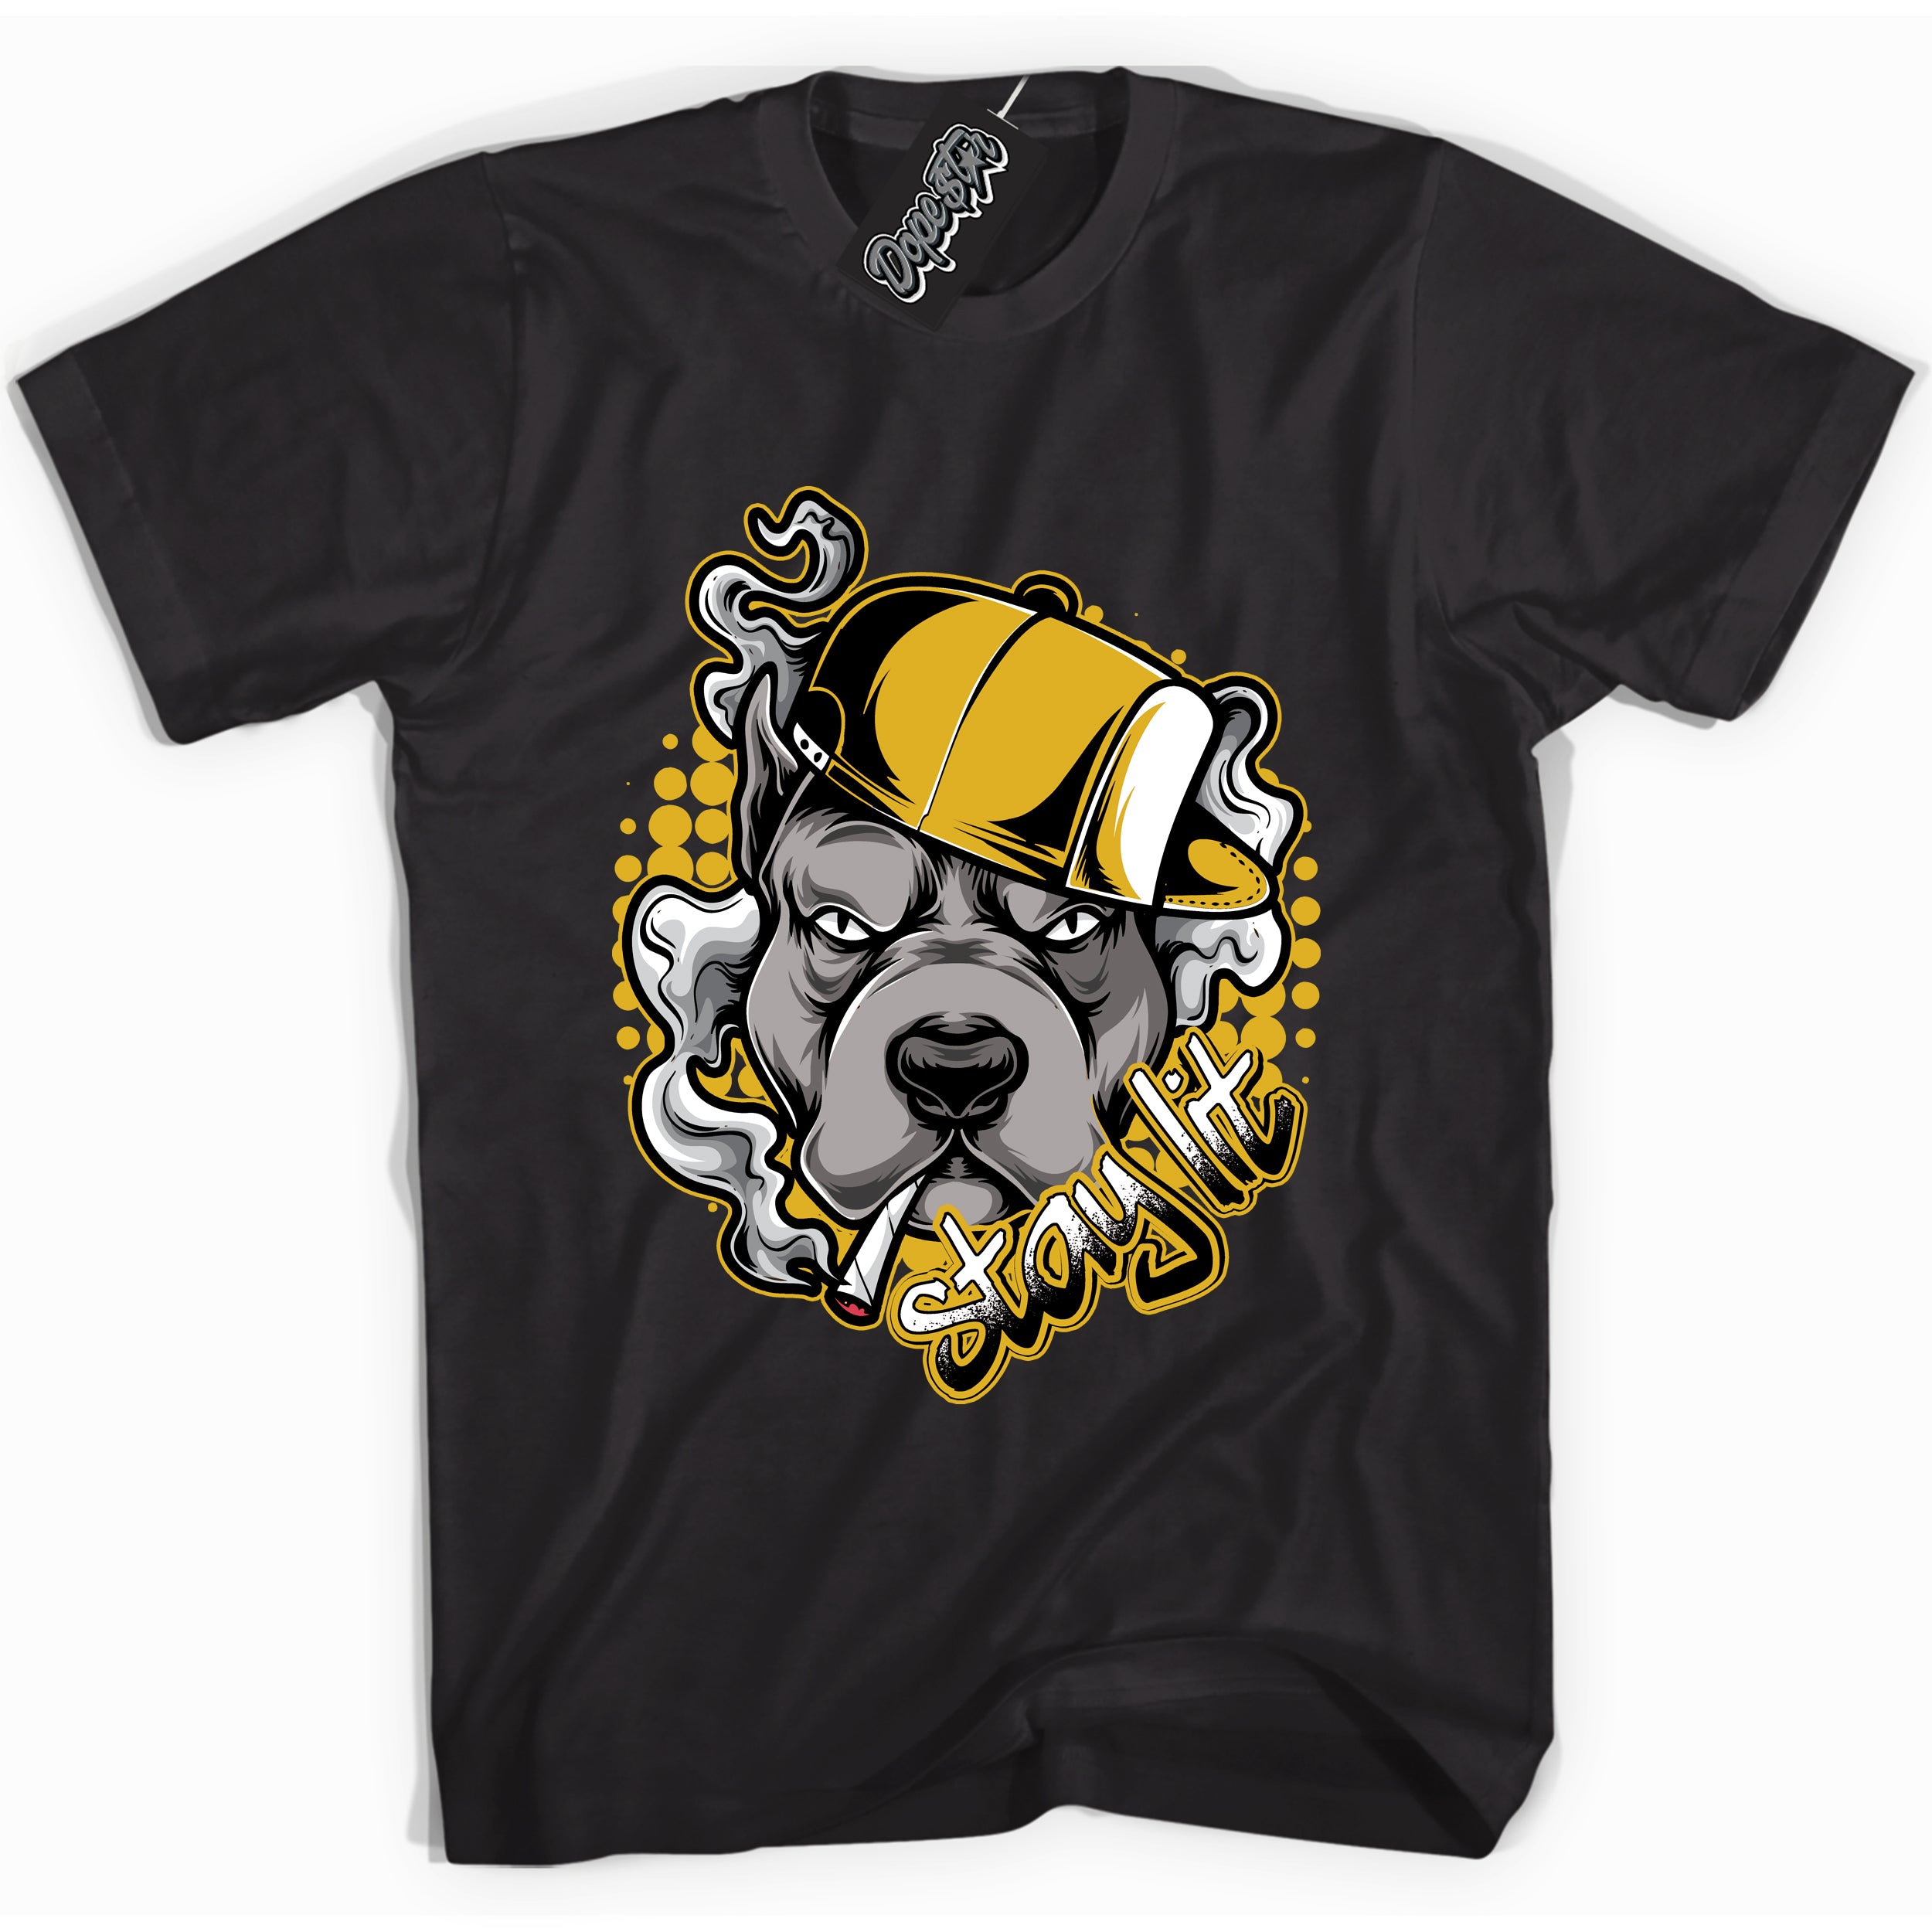 Cool Black Shirt with “ Stay Lit ” design that perfectly matches Yellow Ochre 6s Sneakers.